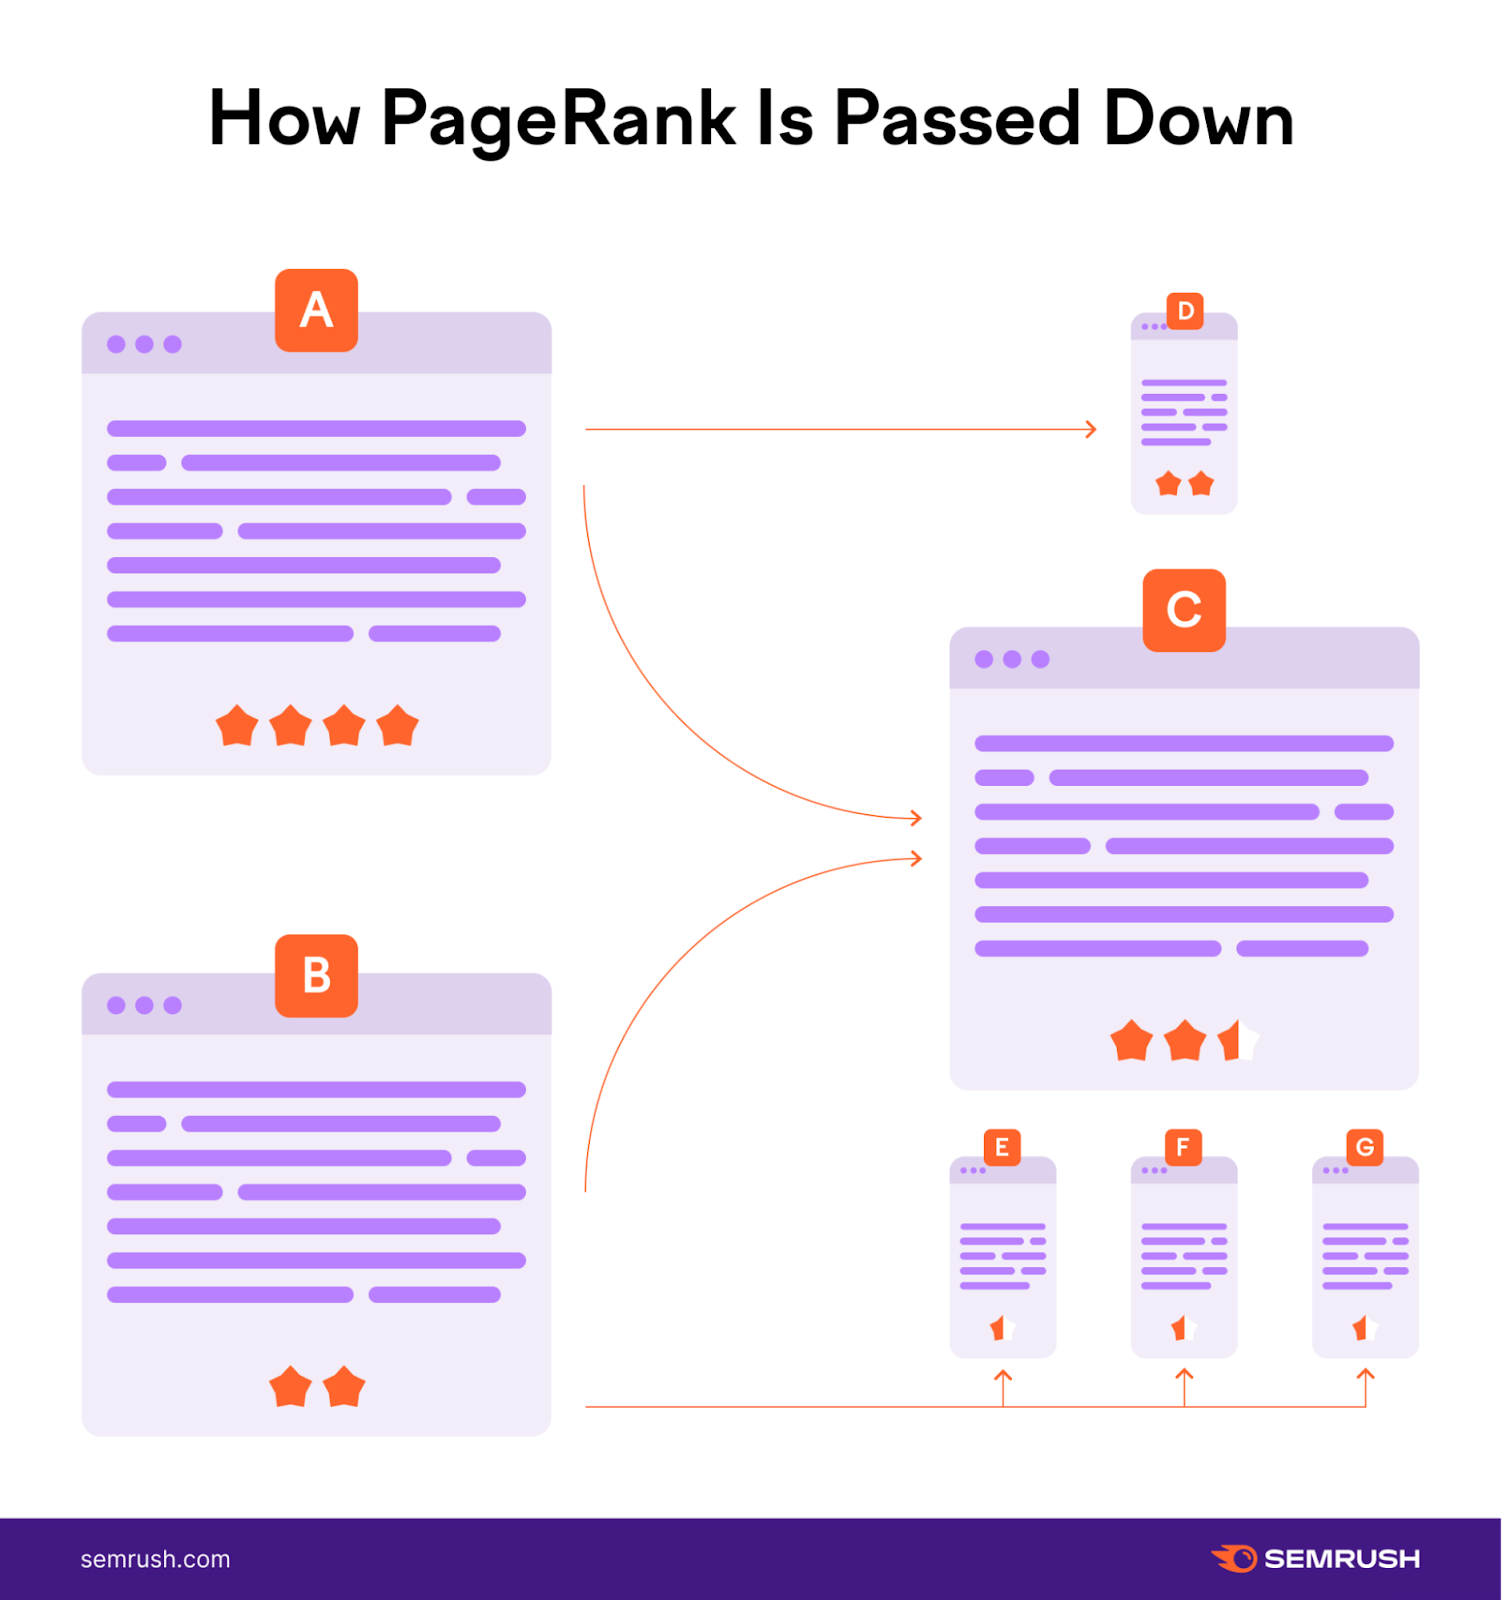 an infographic showing how PageRank is passed down